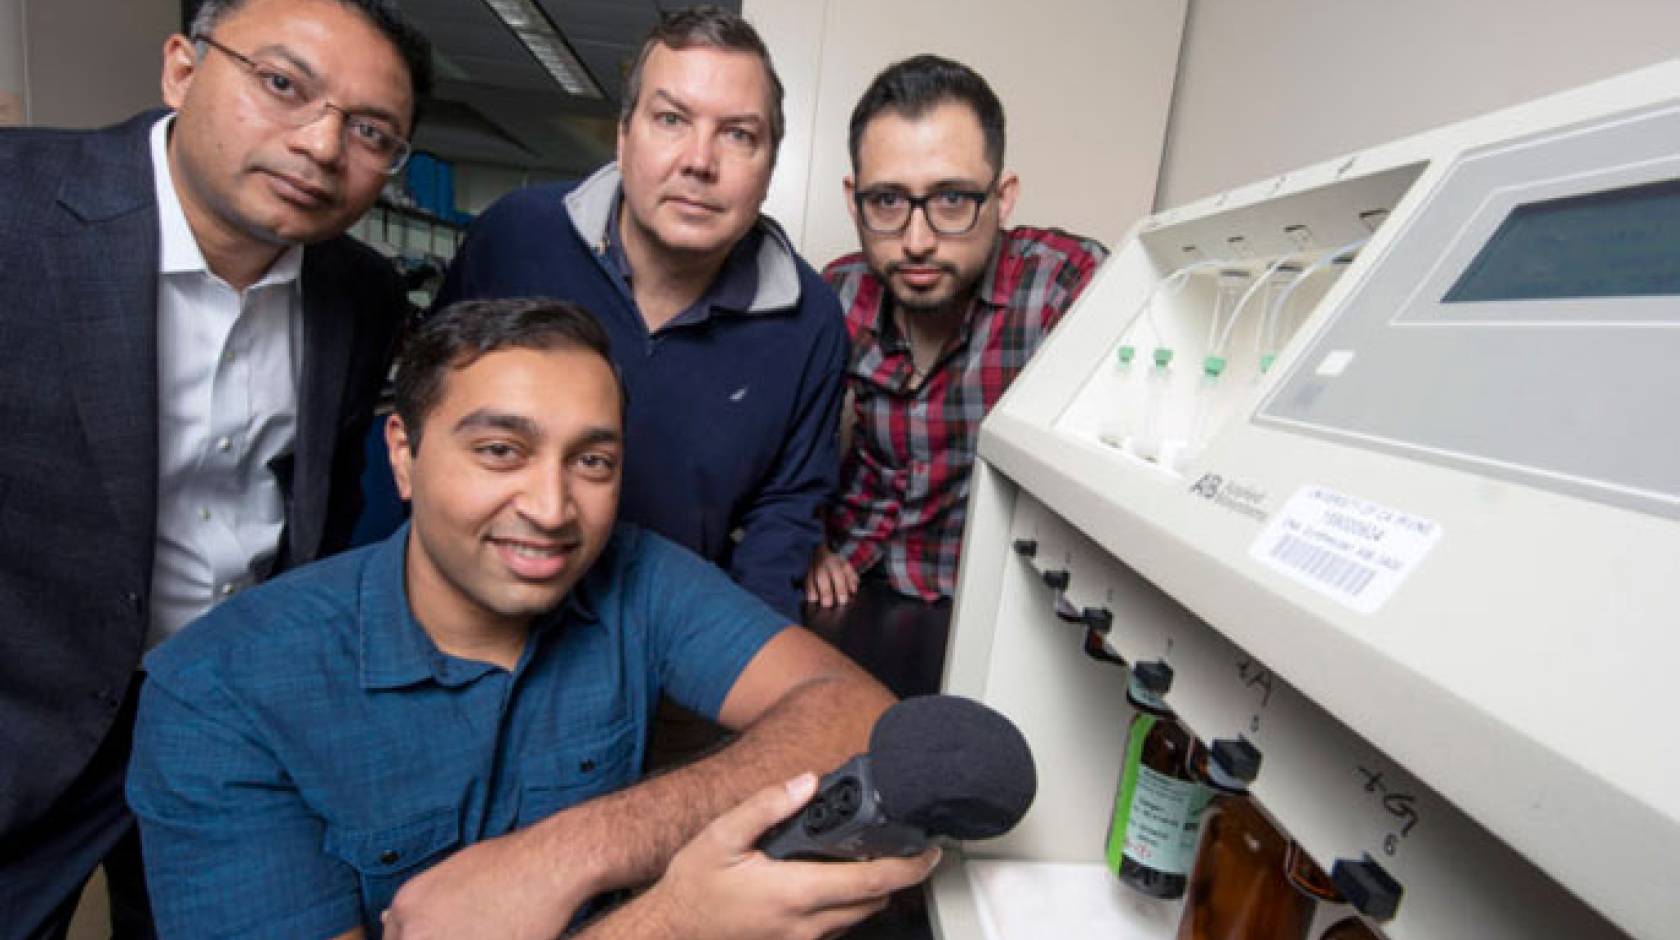 UC Irvine and UC Riverside researchers hold up a microphone to a DNA synthesizer